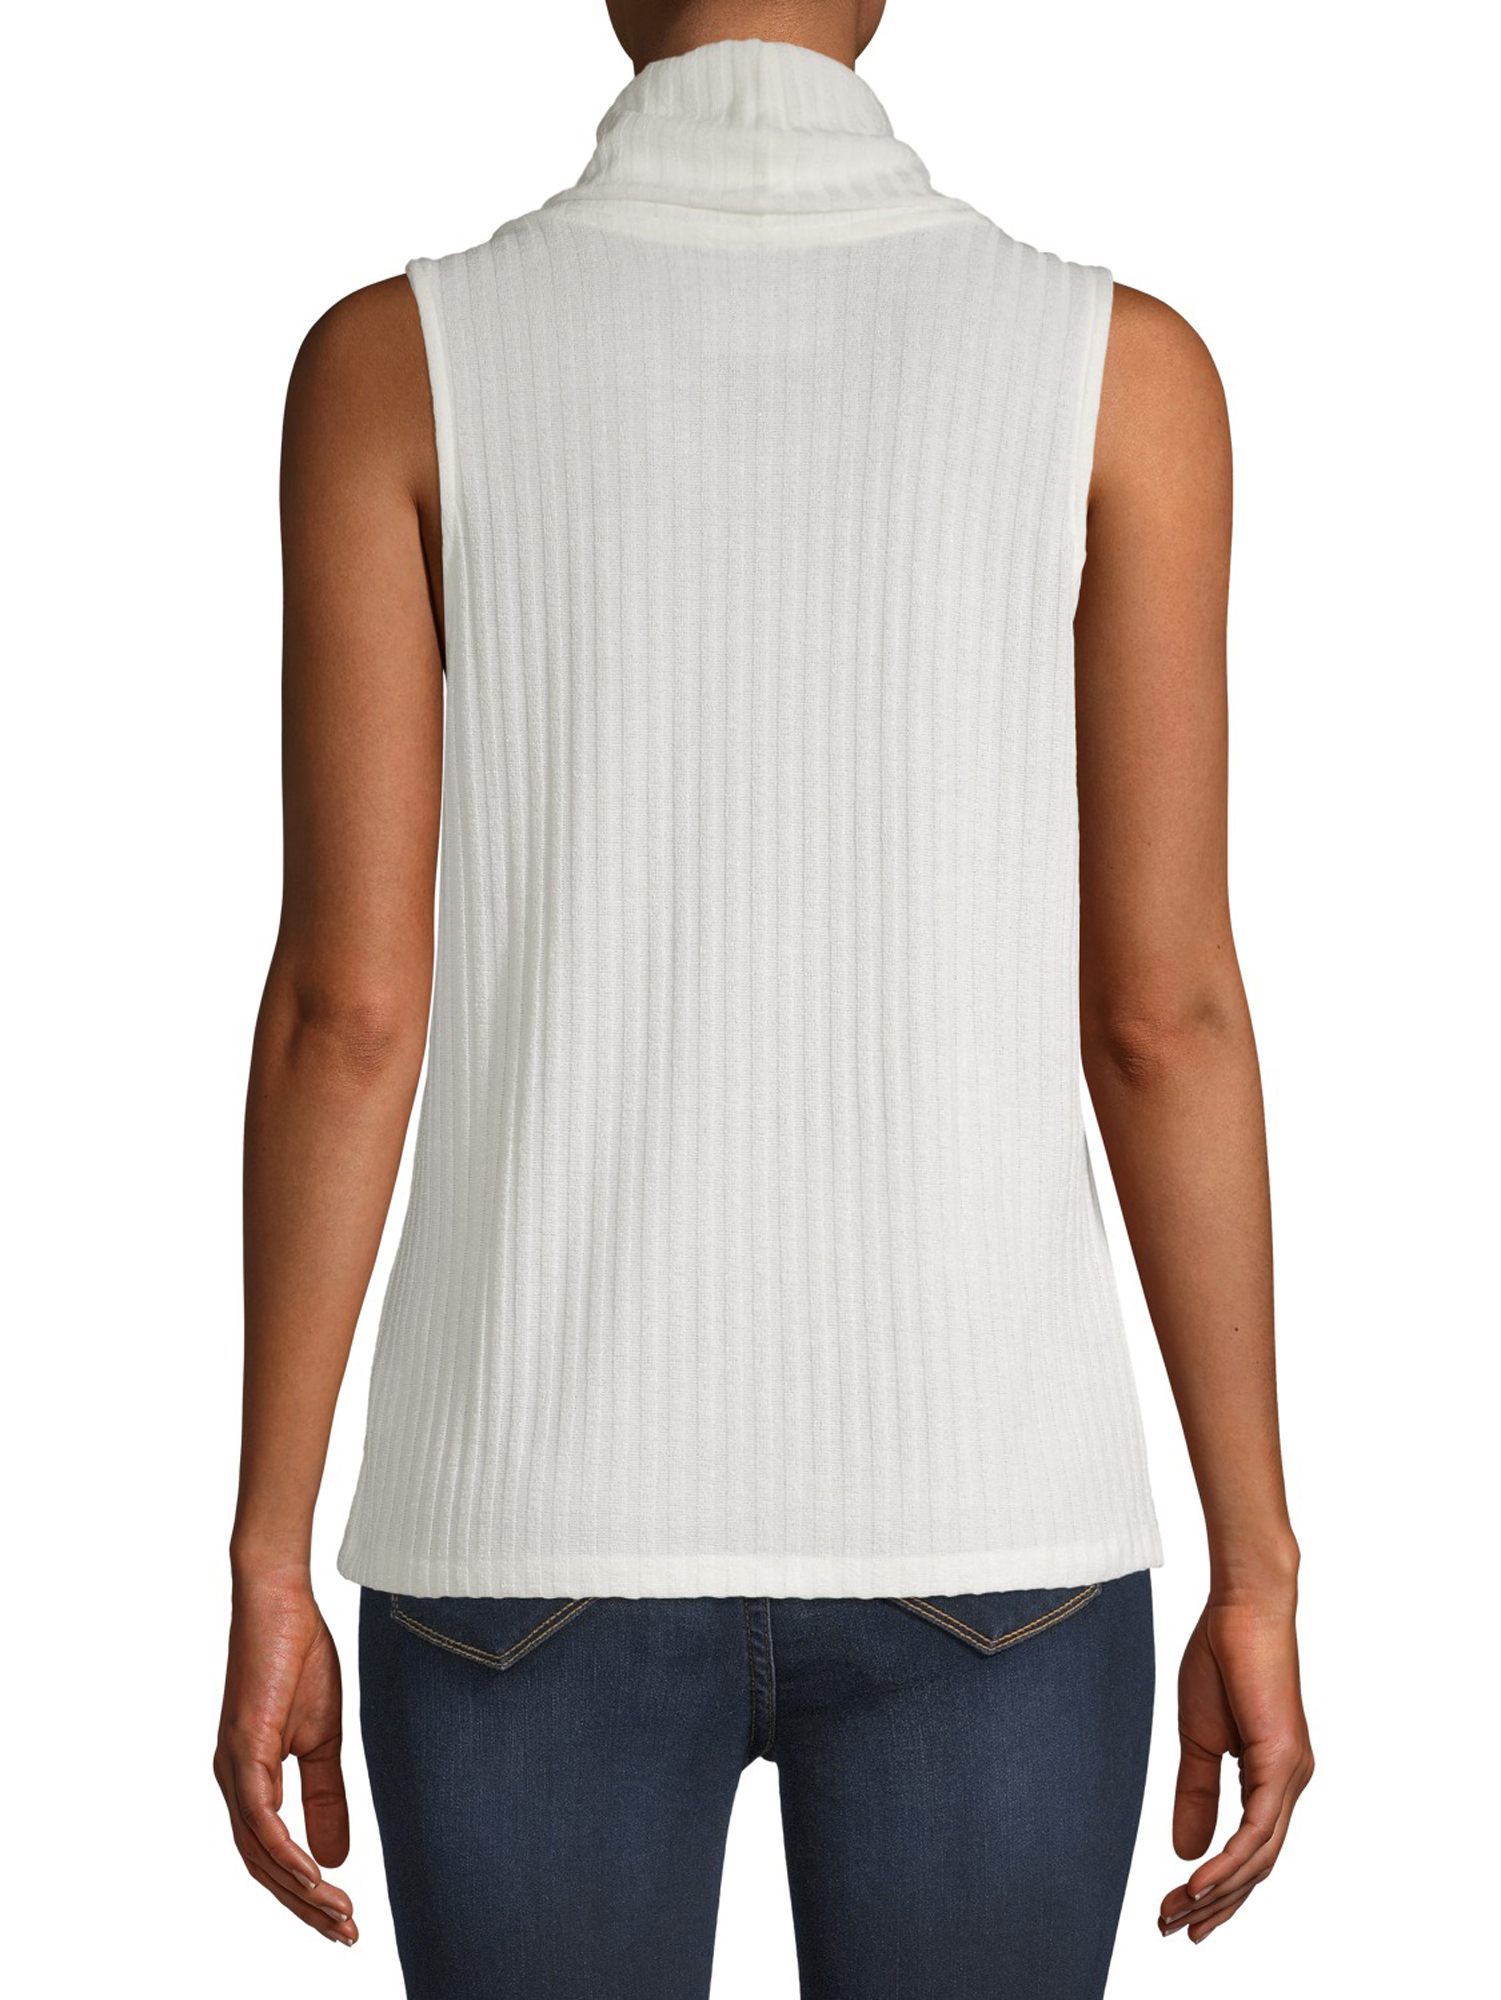 Time and Tru Women's Sleeveless Turtleneck Sweater - image 4 of 5